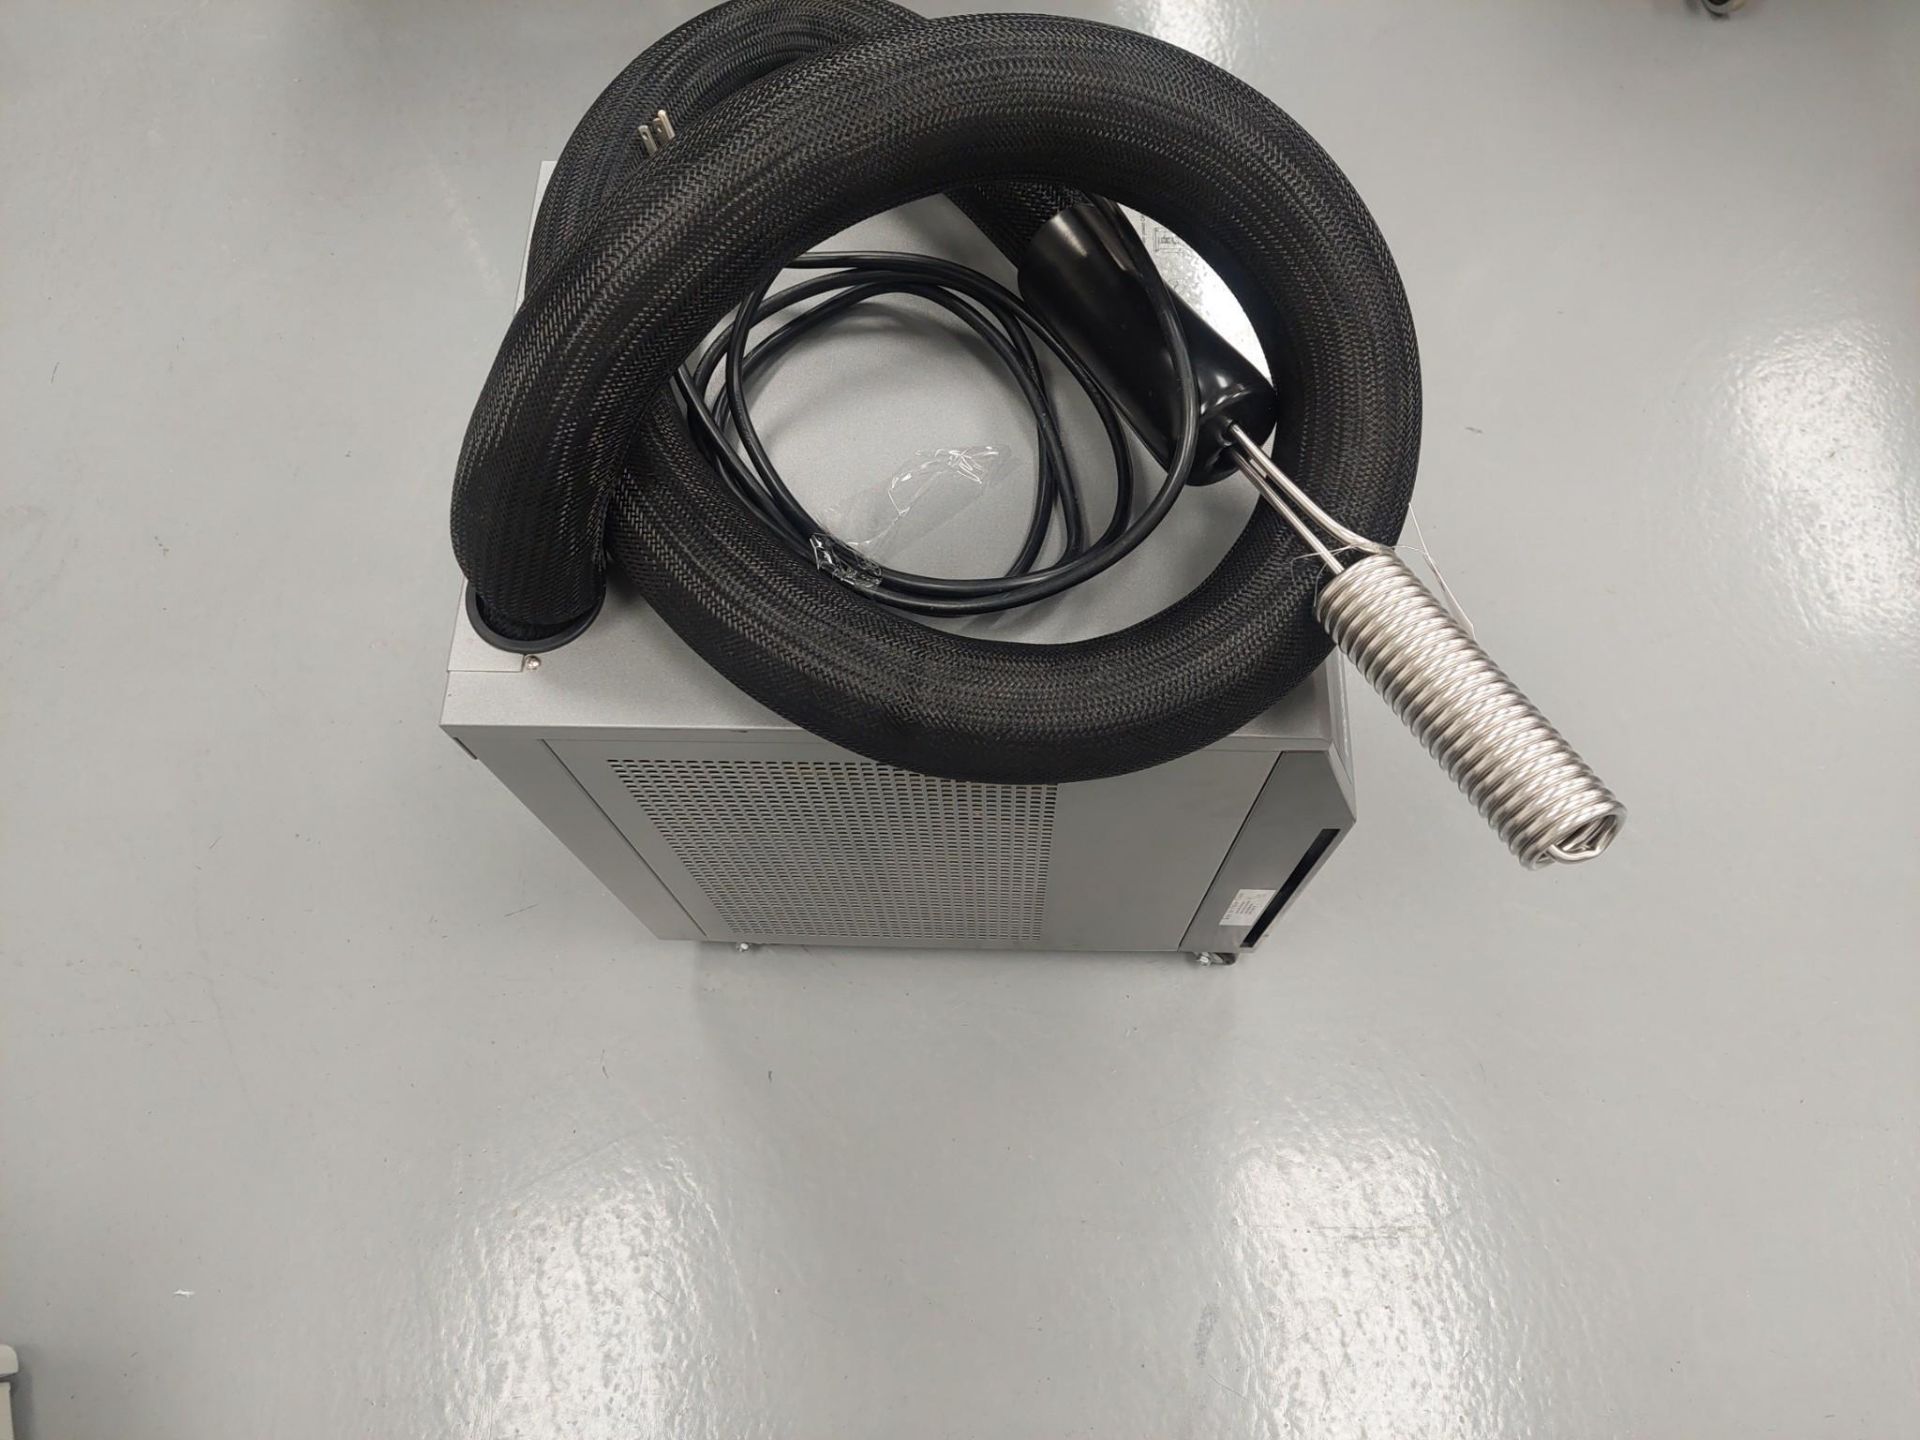 POLYSCIENCE P80NHA101B IP-80 IMMERSION PROBE CHILLER. 1.75" PROBE. 2019 YEAR - Image 5 of 7